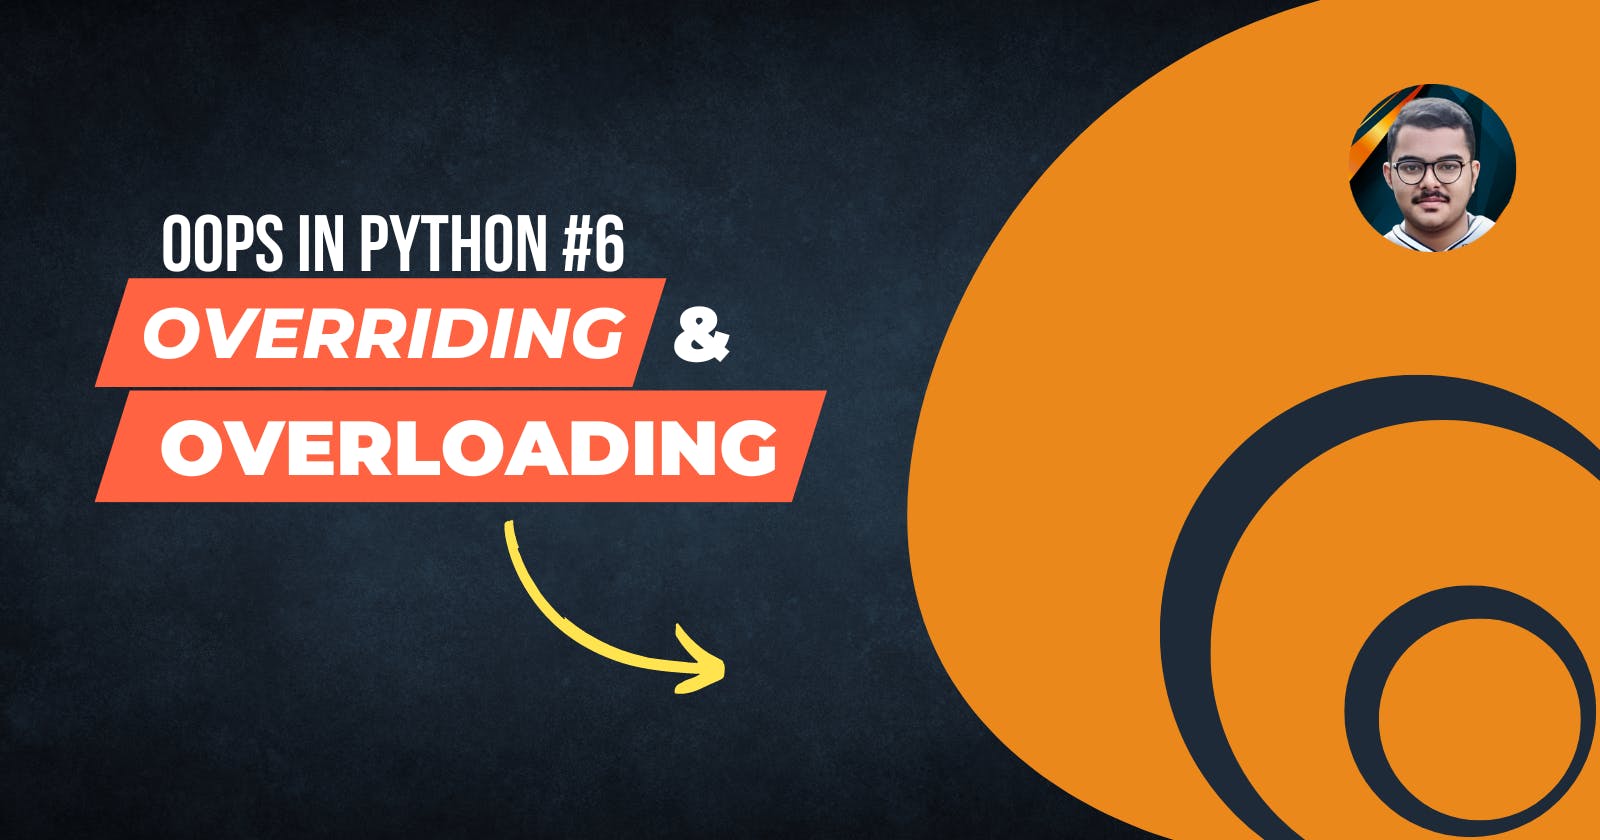 Overriding & Overloading in Python